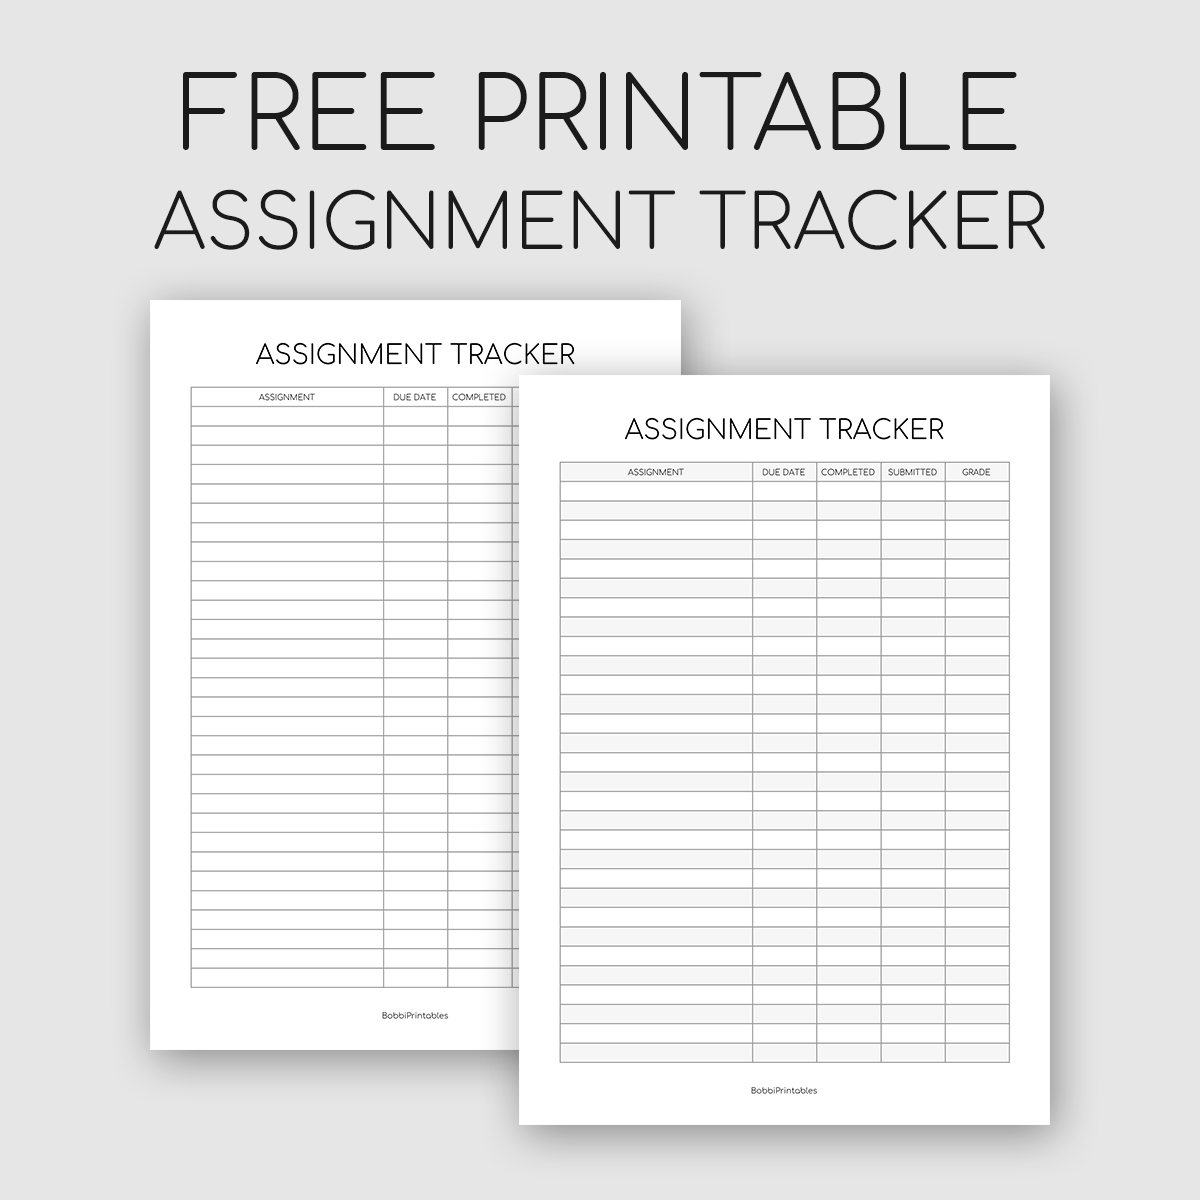 Bobbiprintables Free Printable Assignment Tracker Download Here